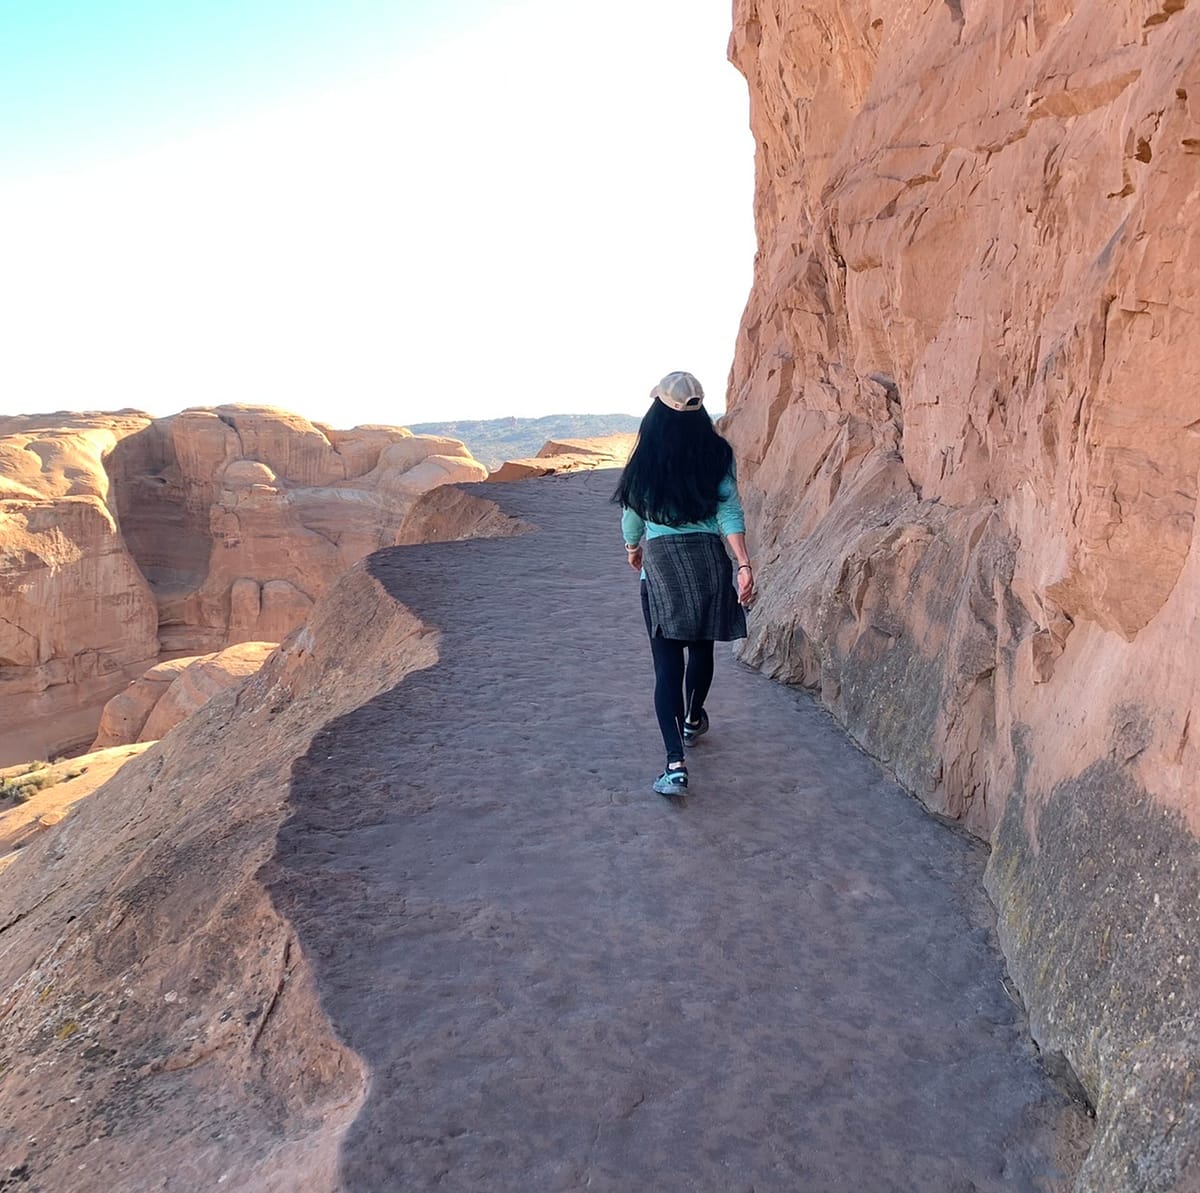 Walking along the ledge near the end of the Delicate Arch hike.  The arch is just around the corner up ahead